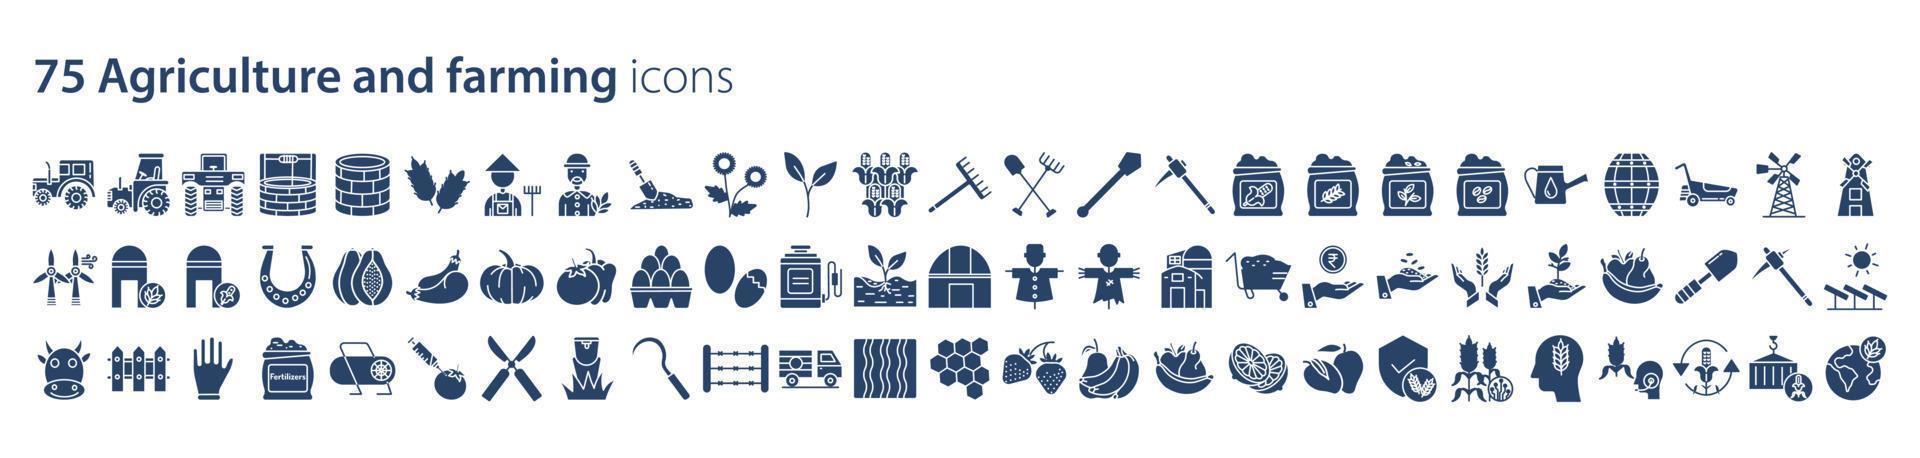 Collection of icons related to Agriculture and farming, including icons like Leaf, tractor, food, fruit, garden and more. vector illustrations, Pixel Perfect